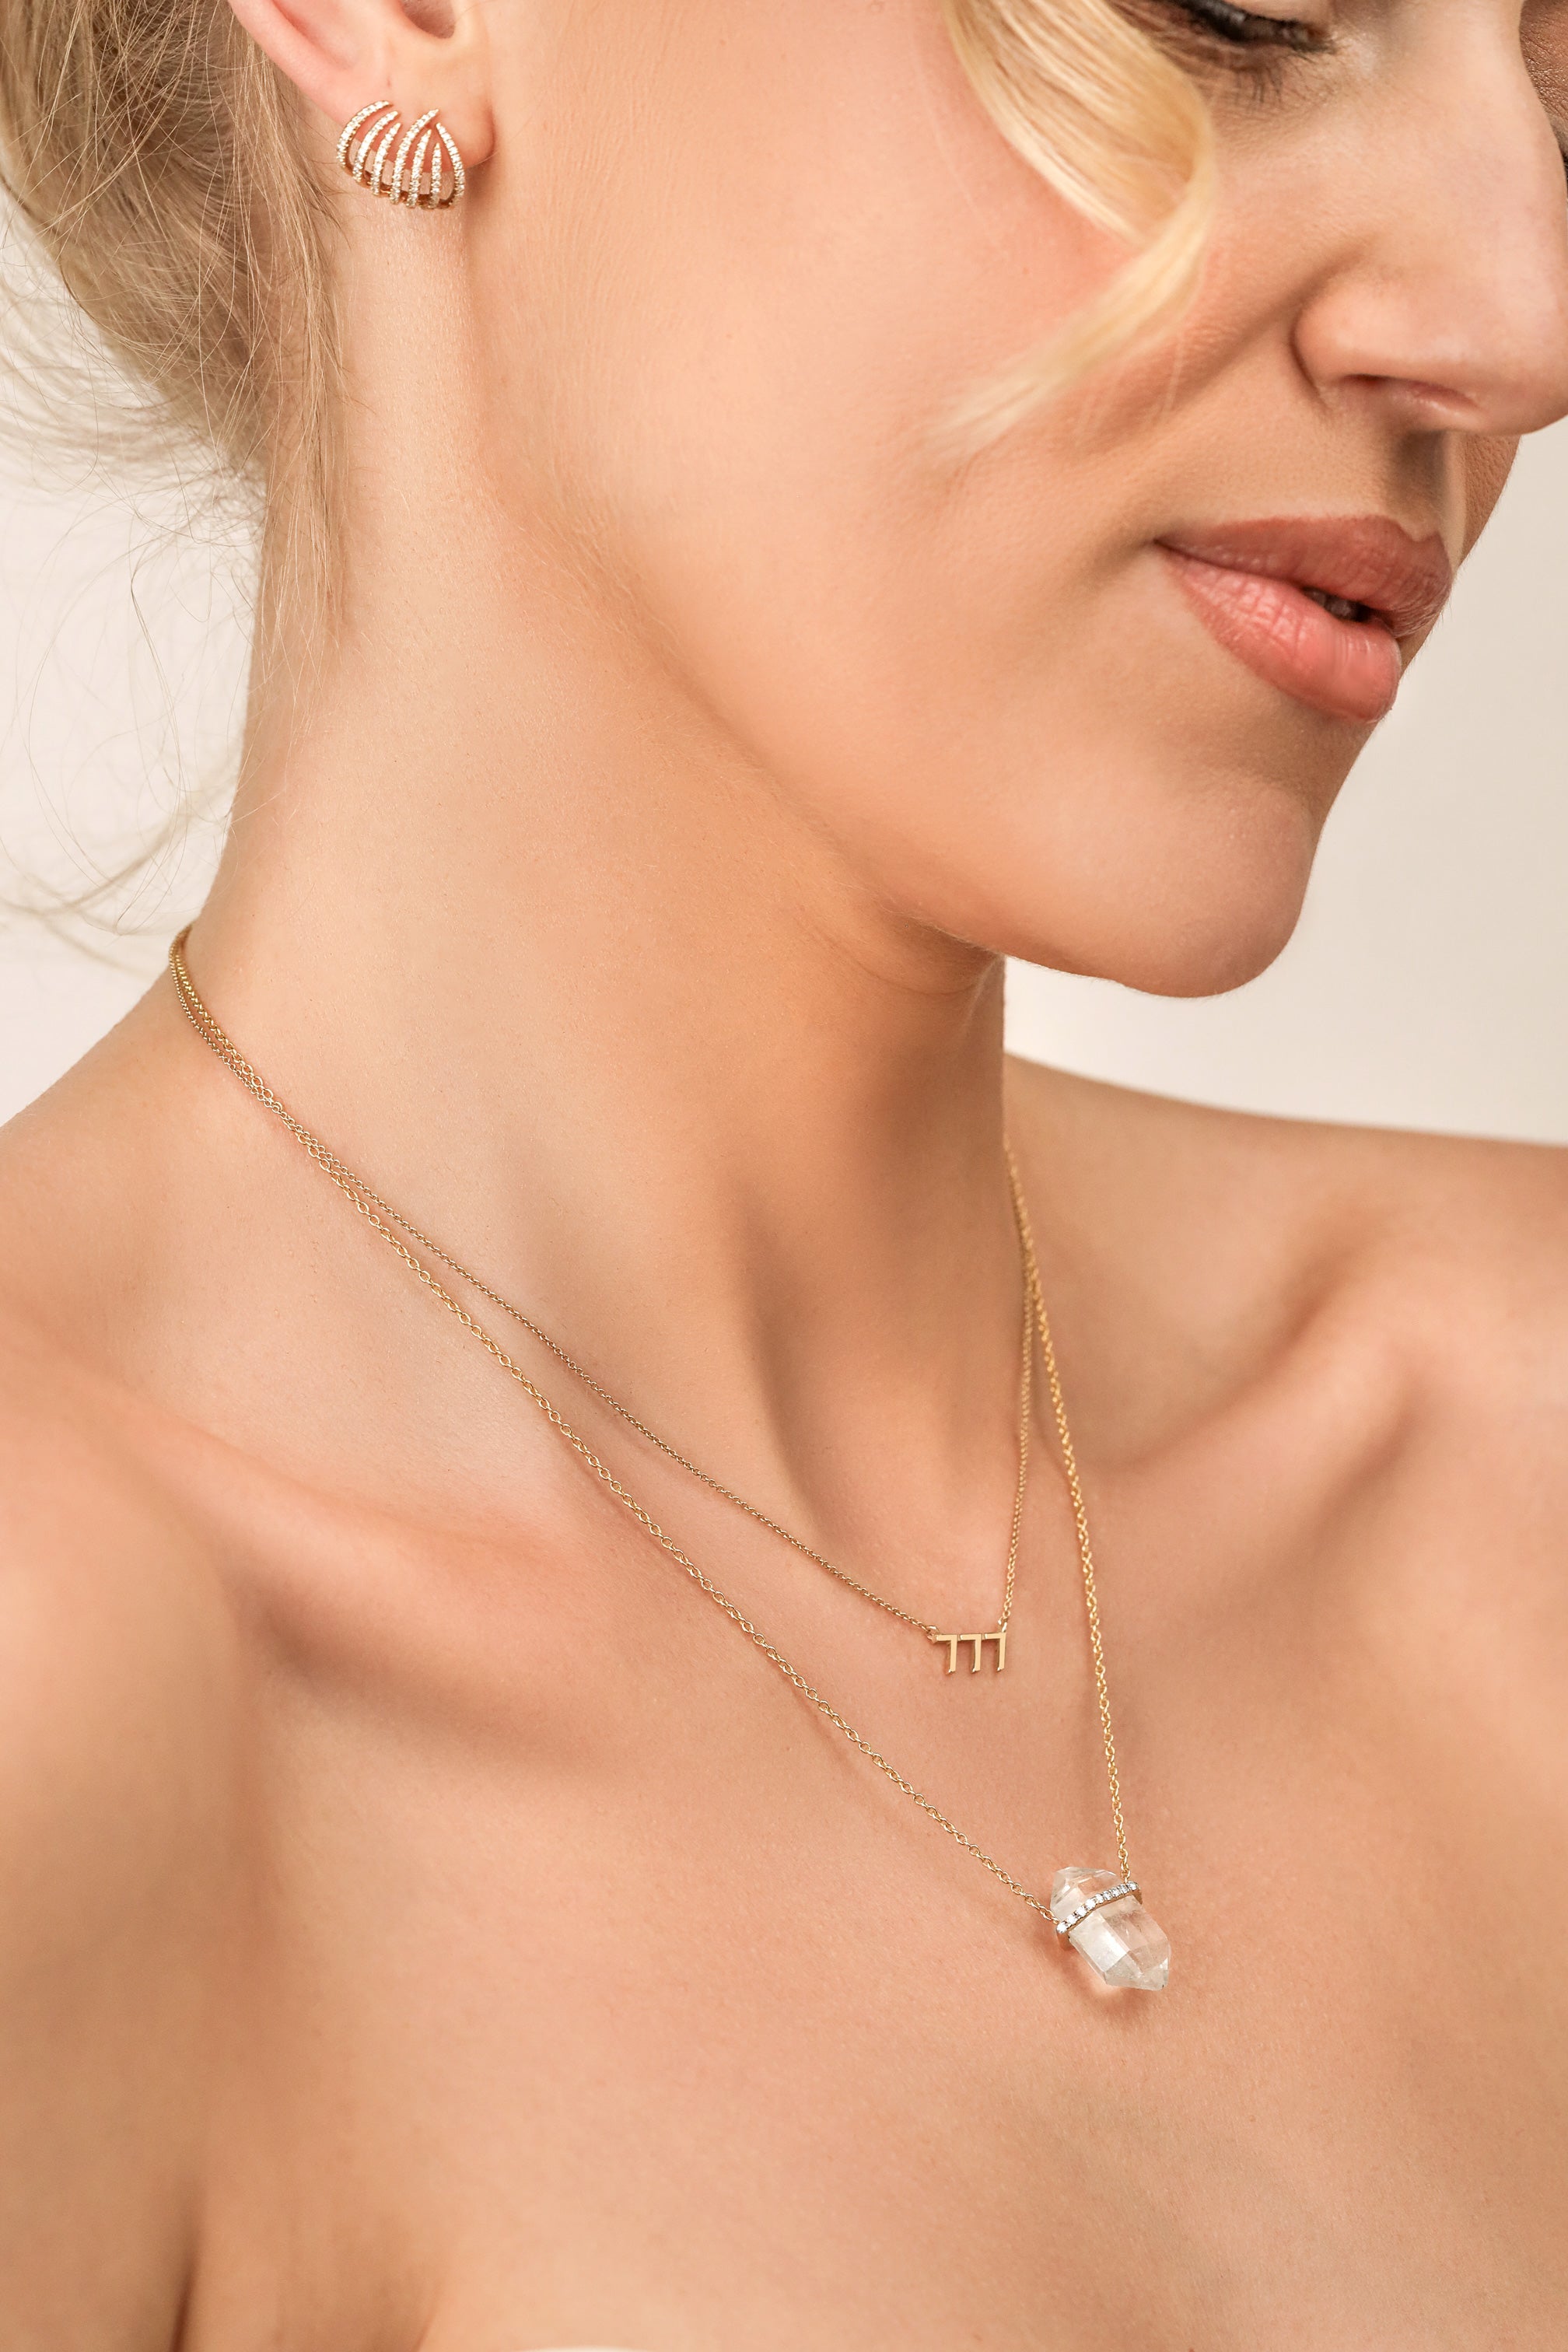 woman wearing two necklaces and diamond earrings by carter eve jewelry